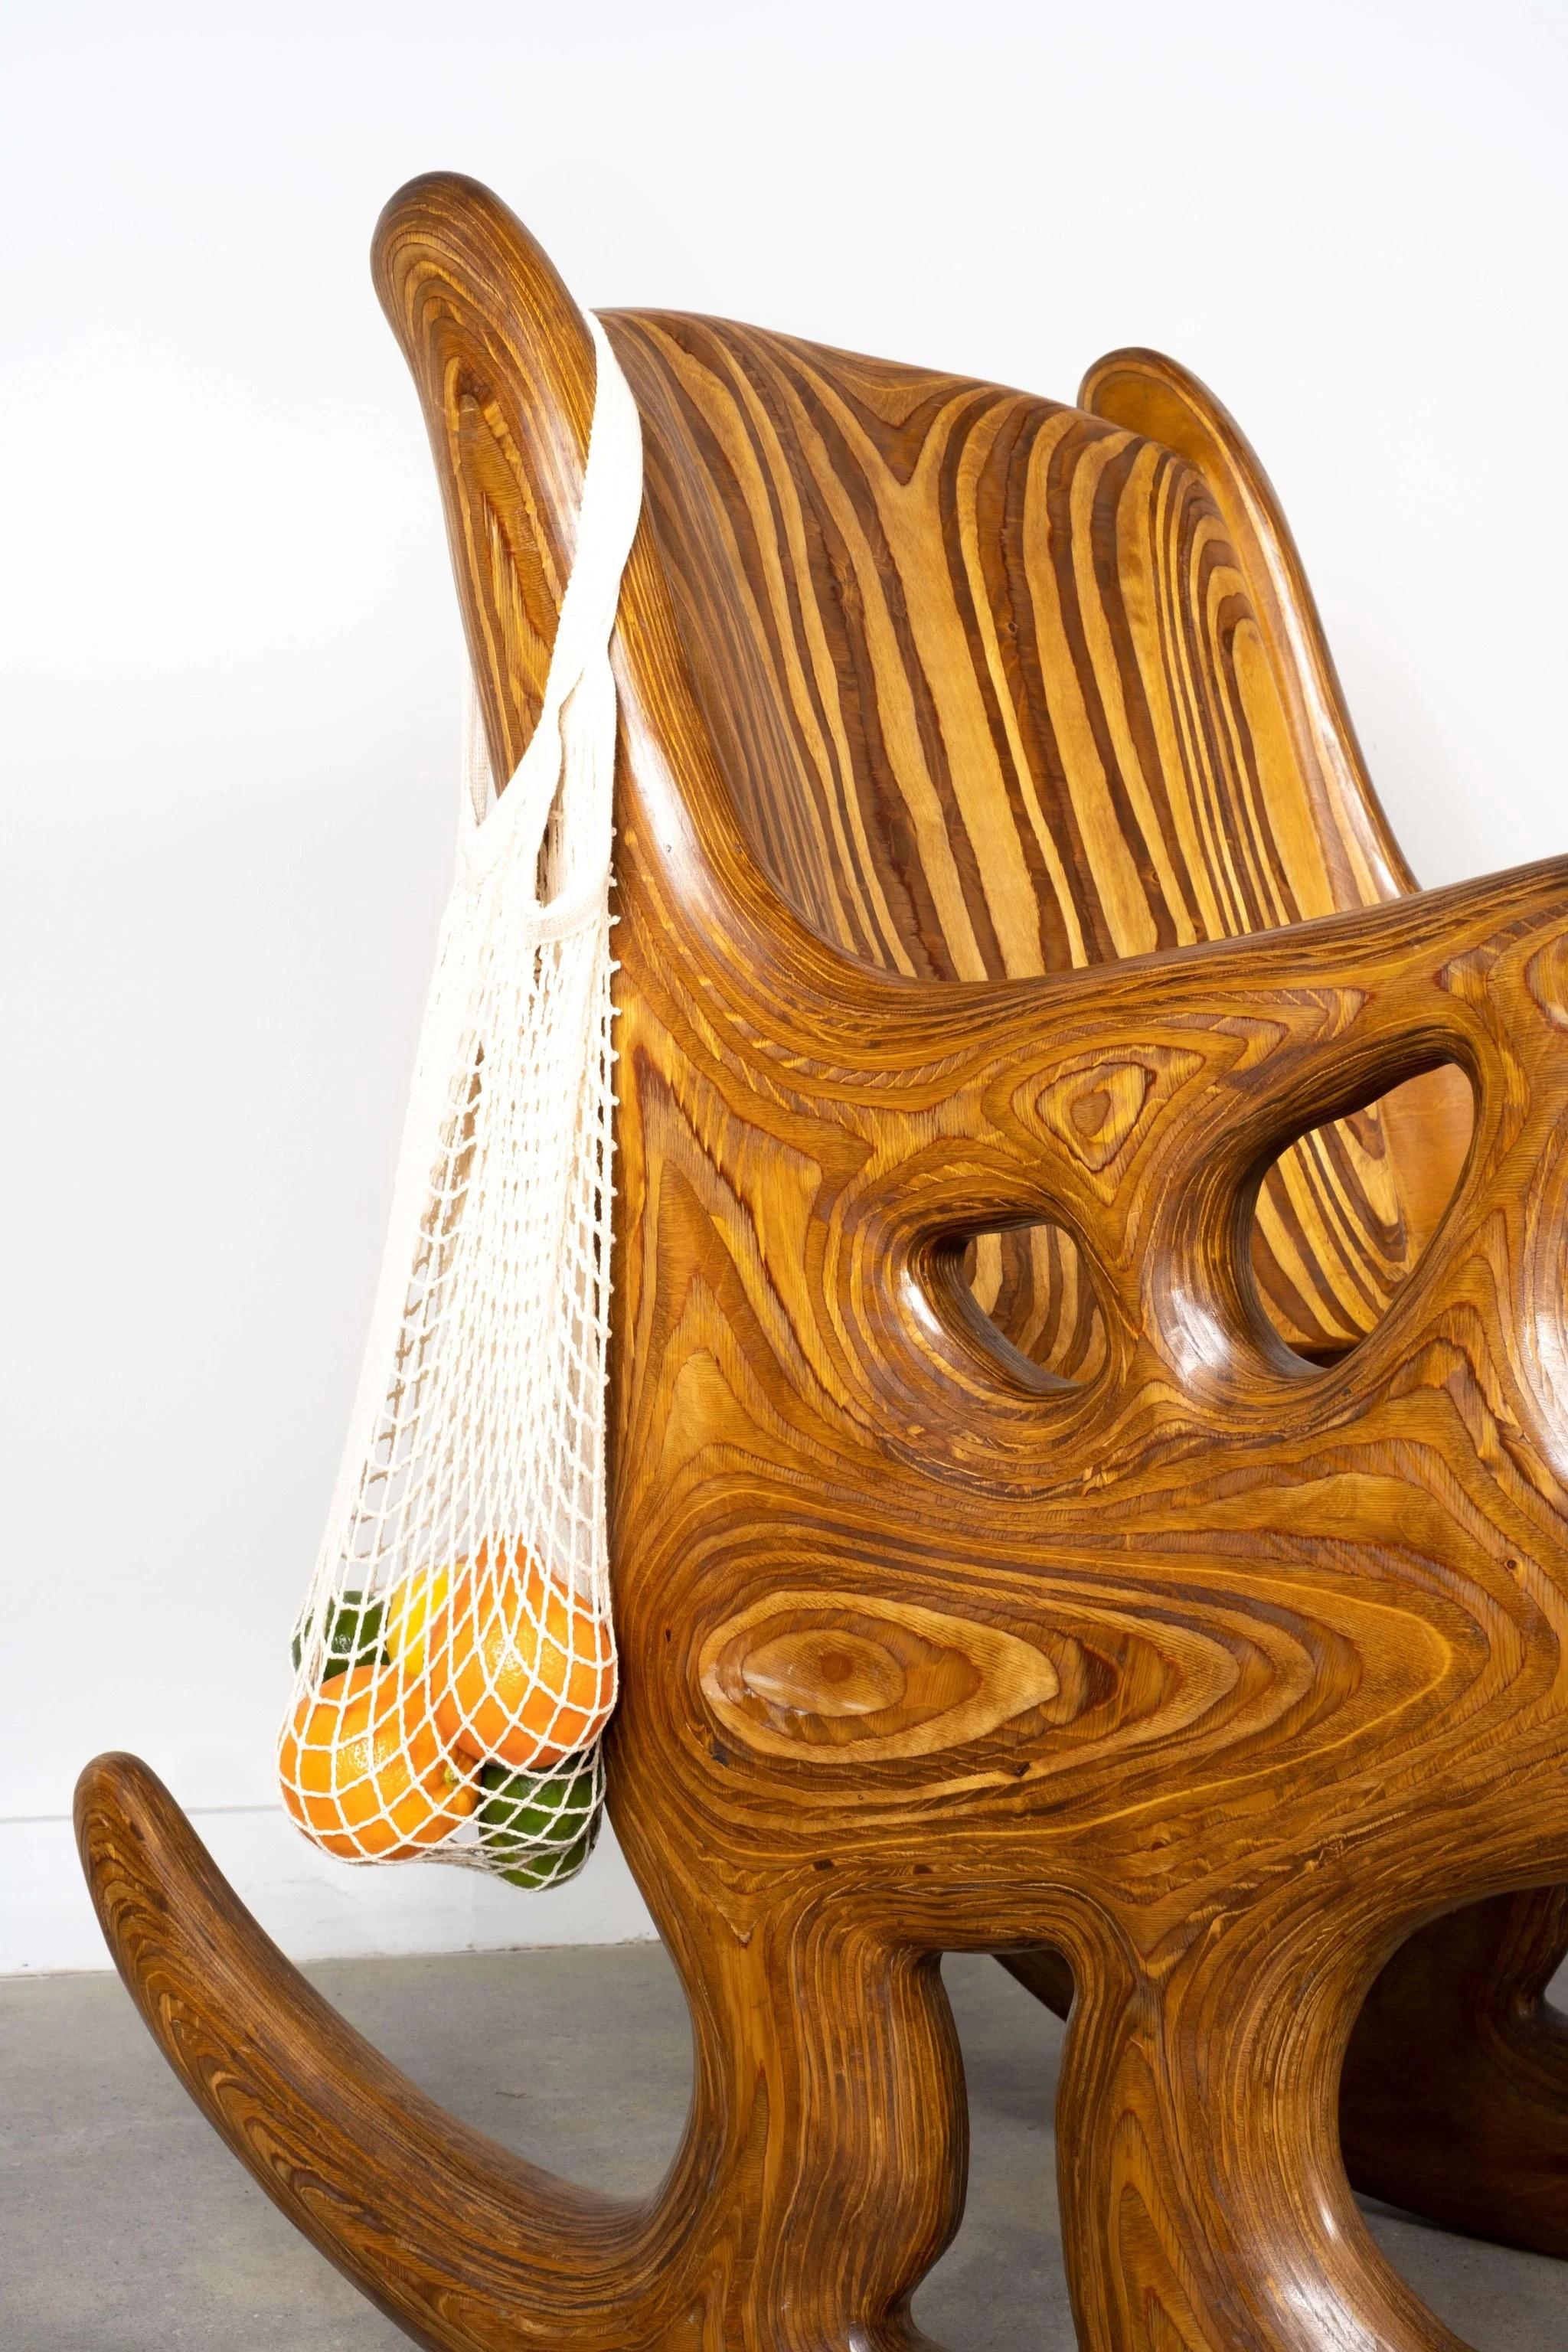 More art piece than furniture piece, this 1980s studio-made “Rocking Rocker Chair” by American artist Douglas Hackett is a study in woodworking. Its biomorphic shapes and smooth sculptural surface are a celebration of material.